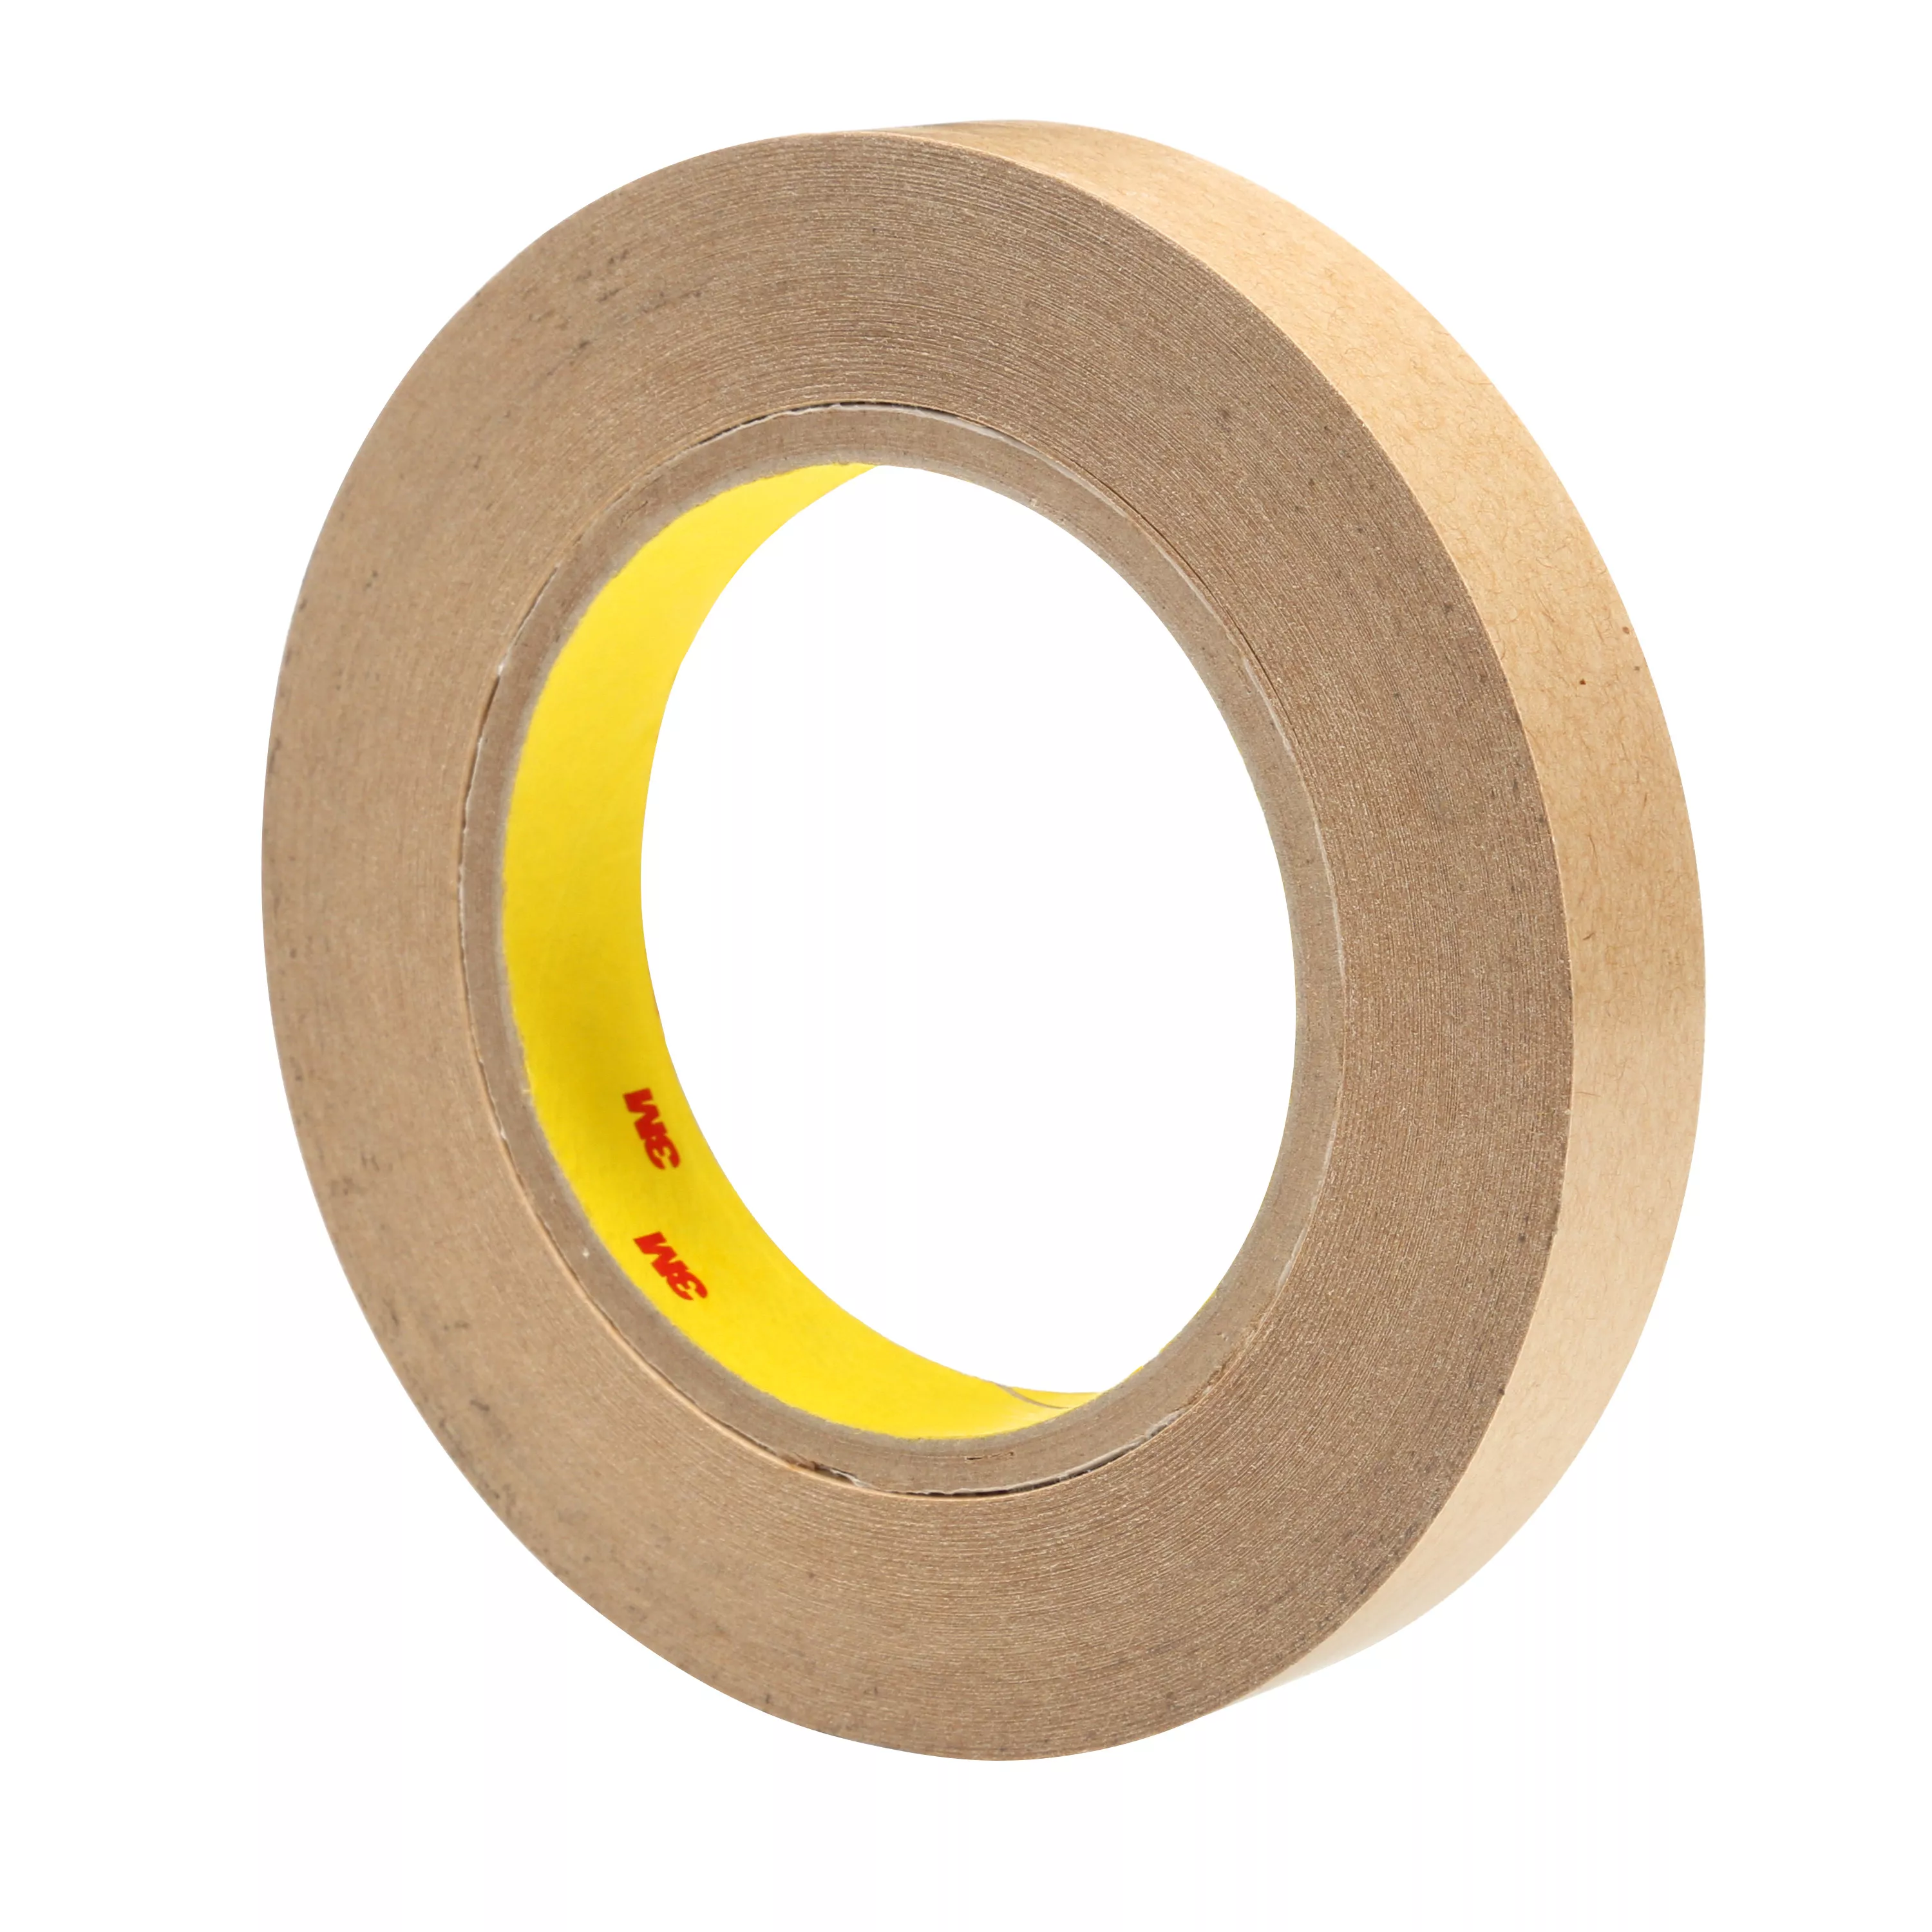 Product Number 465 | 3M™ Adhesive Transfer Tape 465